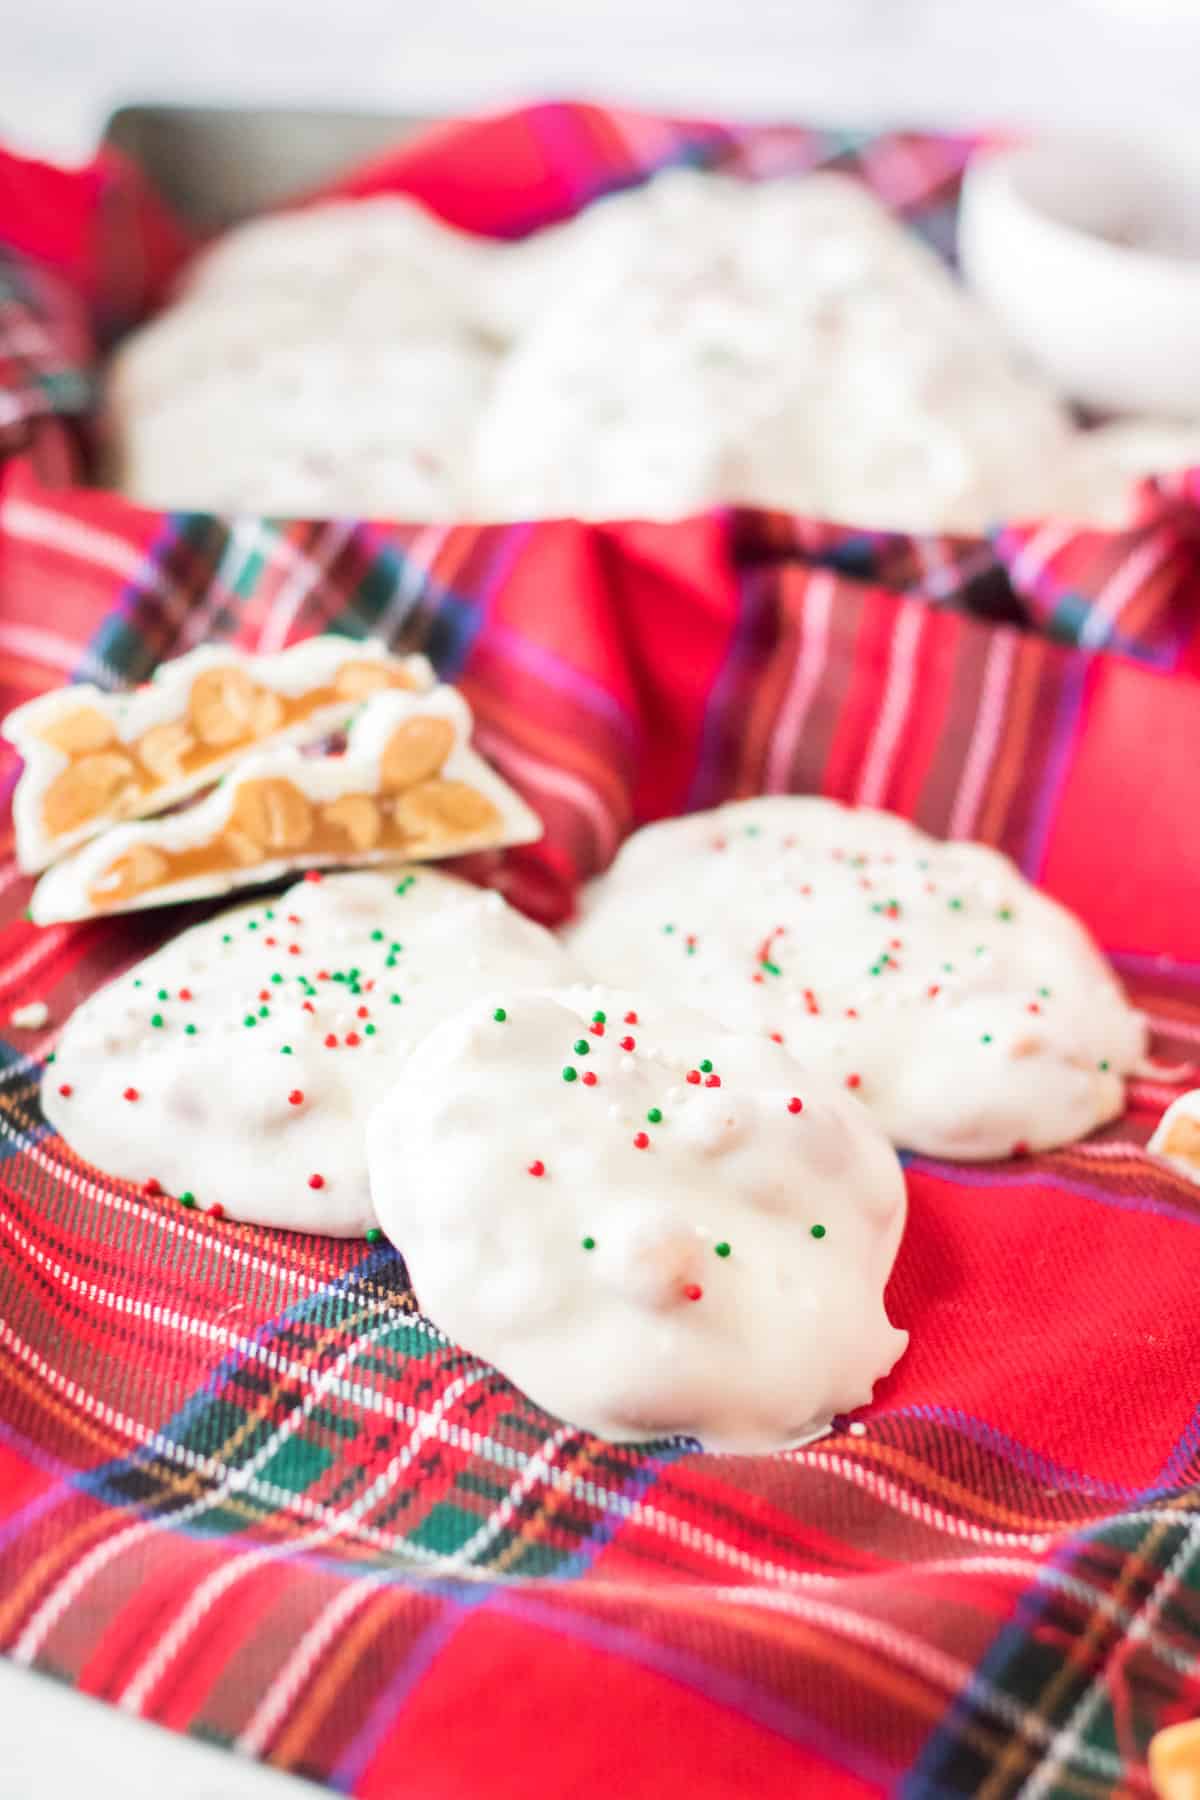 White chocolate polar bear paws candy with red and green sprinkles on top on a red plaid linen. One candy is cut in half to show caramel and peanuts inside.